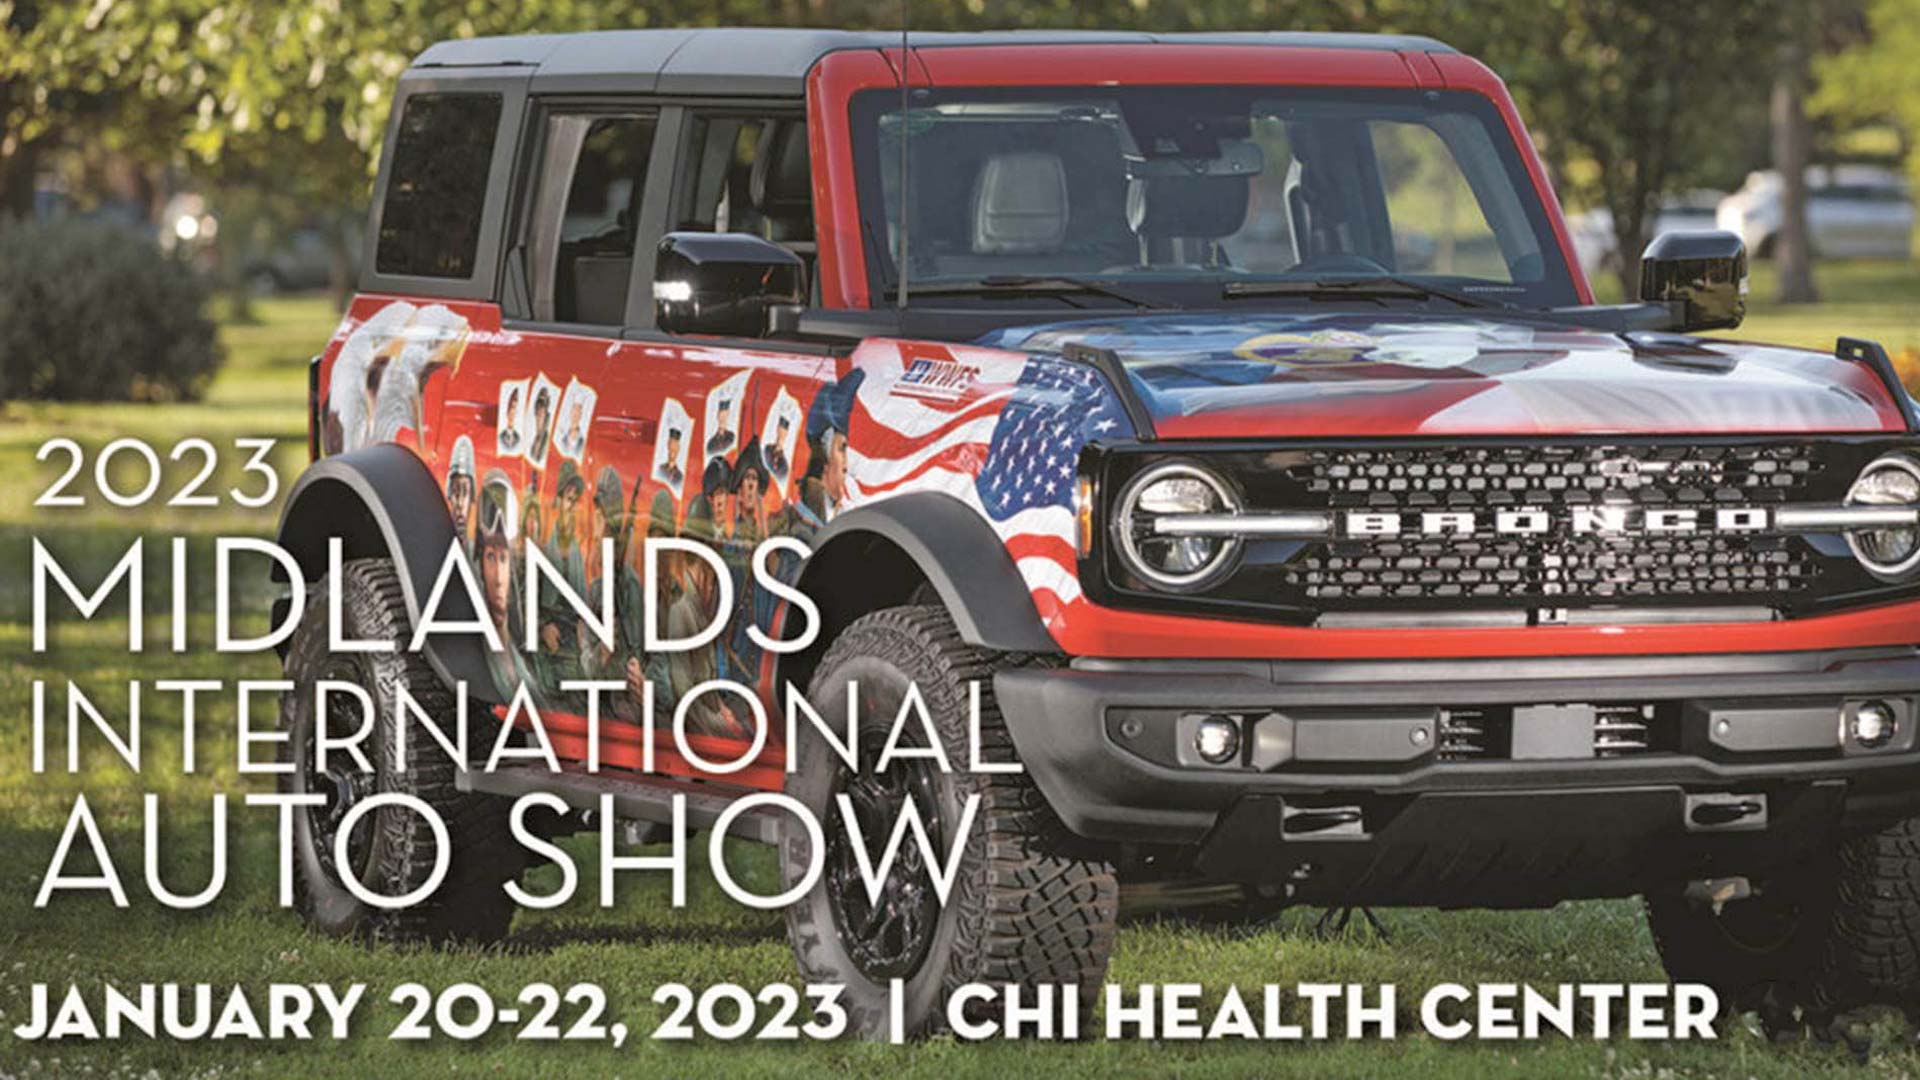 Midlands International Auto Show invites Wounded Warriors Family Support